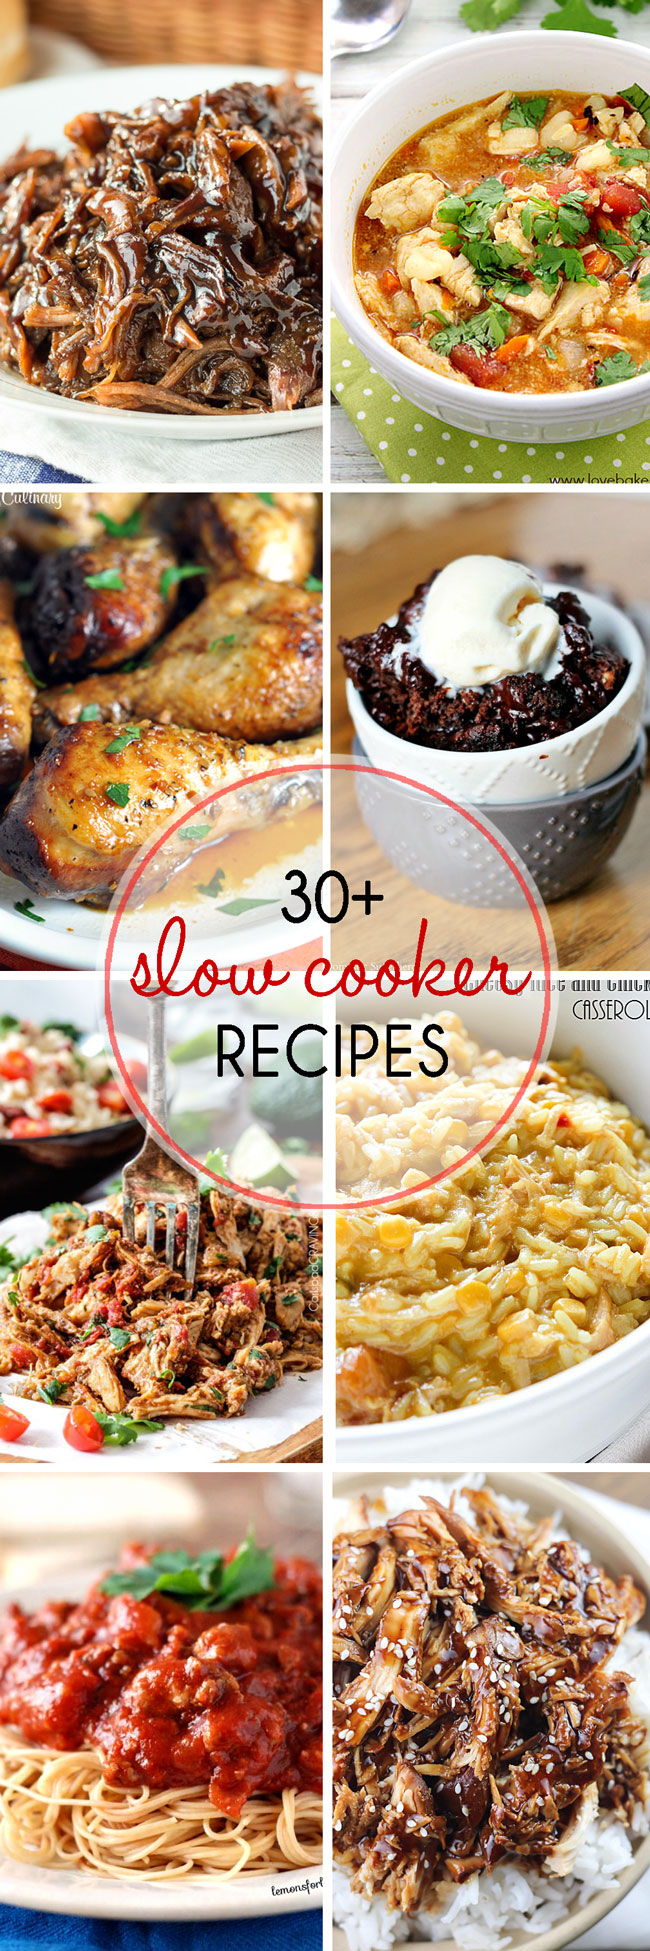 Ready to start using that slow cooker that's hiding in your cabinet? Here's Over 30 Easy Slow Cooker Recipes for you to enjoy over and over!